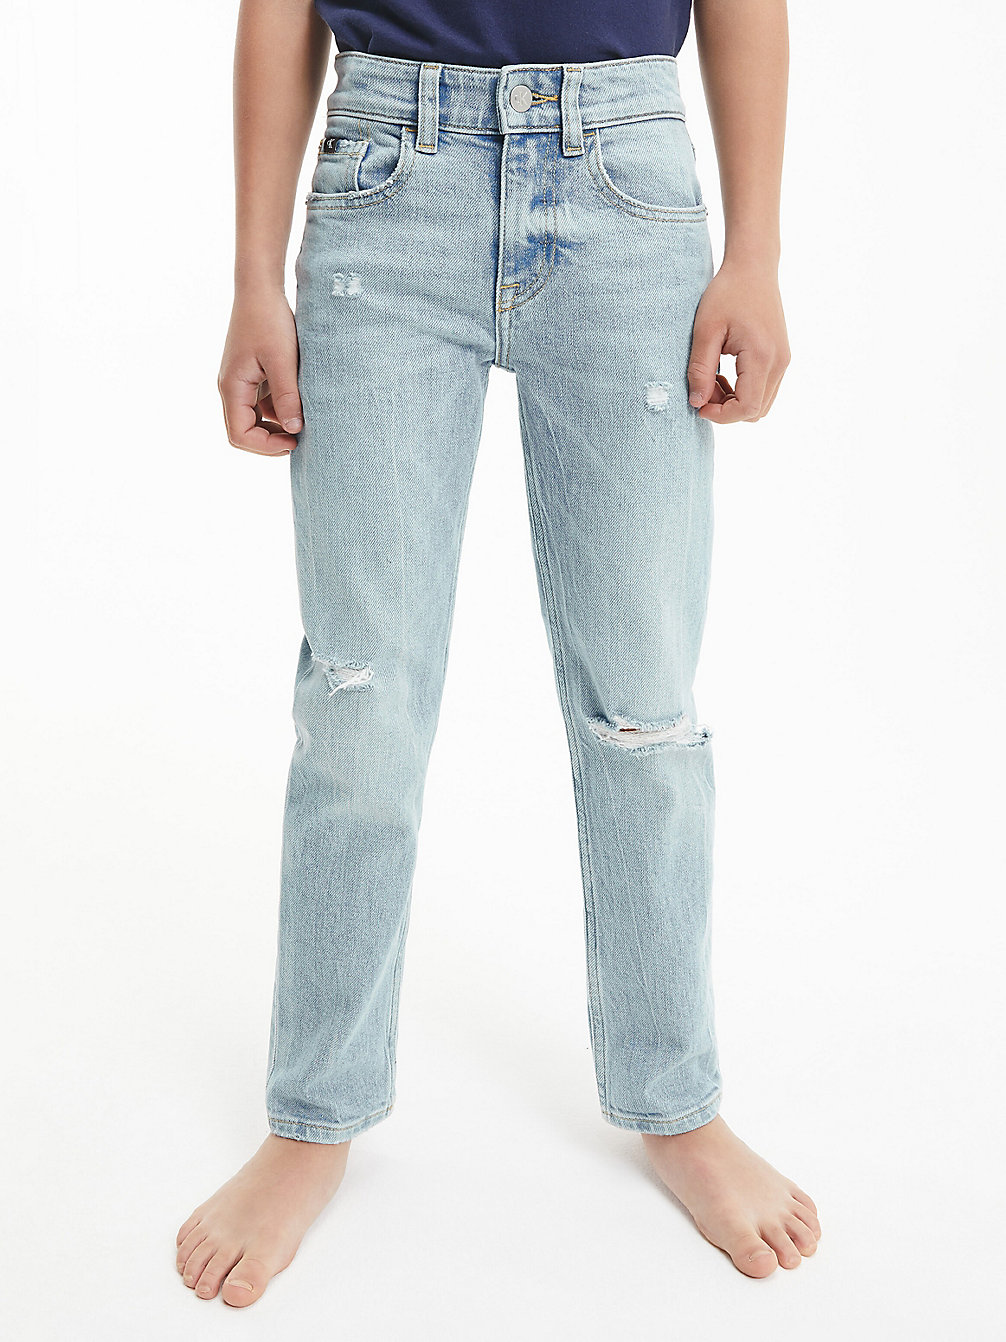 DESTROY LIGHT BLUE Mid Rise Straight Ripped Jeans undefined boys Calvin Klein